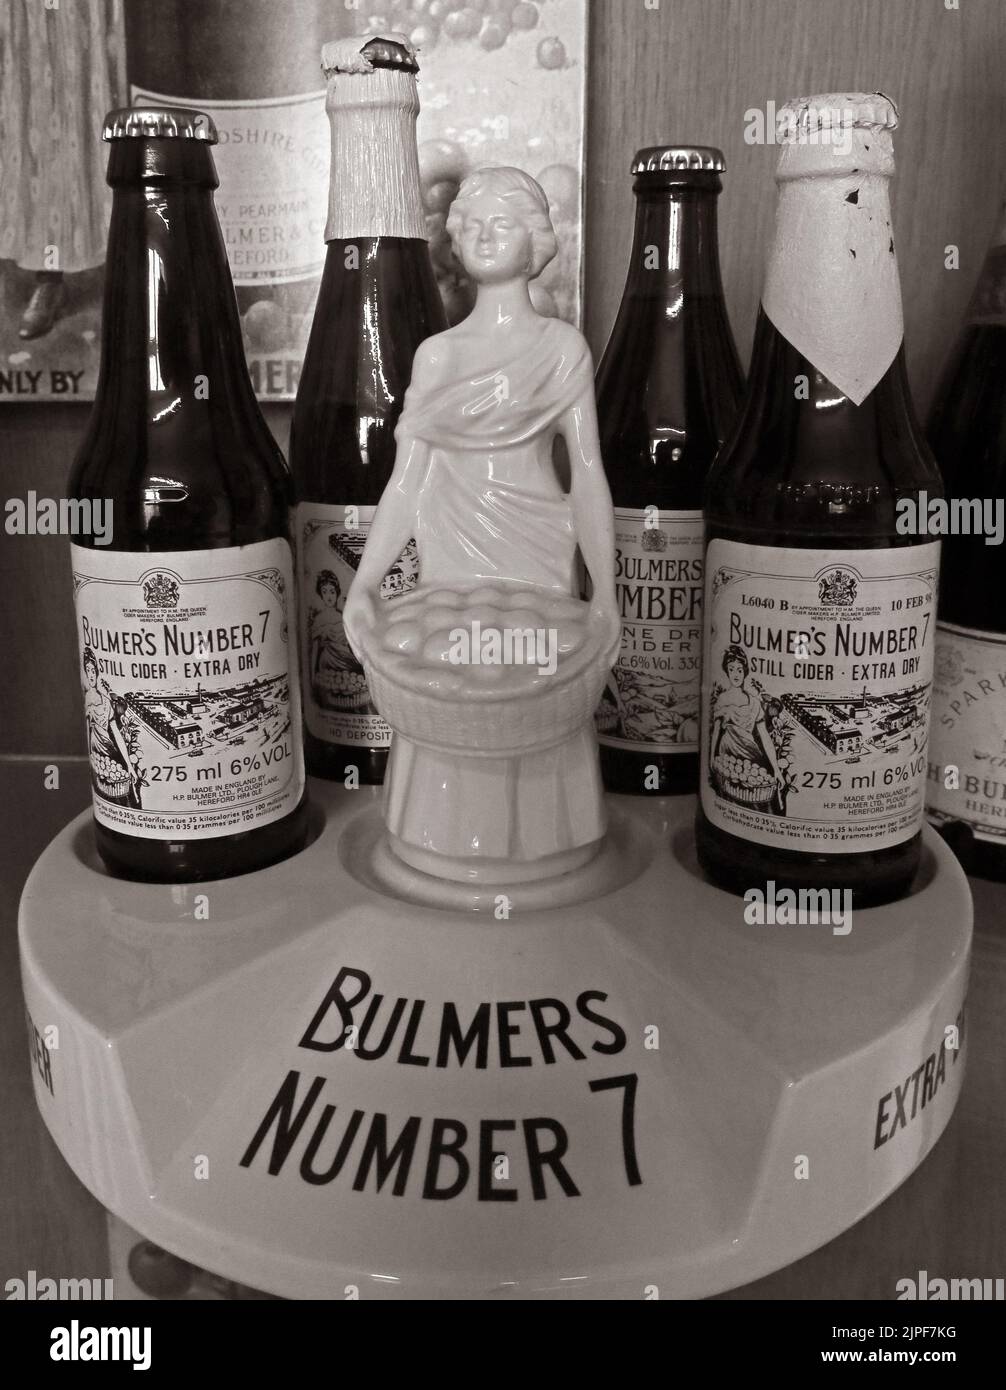 Bulmers Number 7 cider display, ceramic base, woman and historic extra dry cider bottles Stock Photo